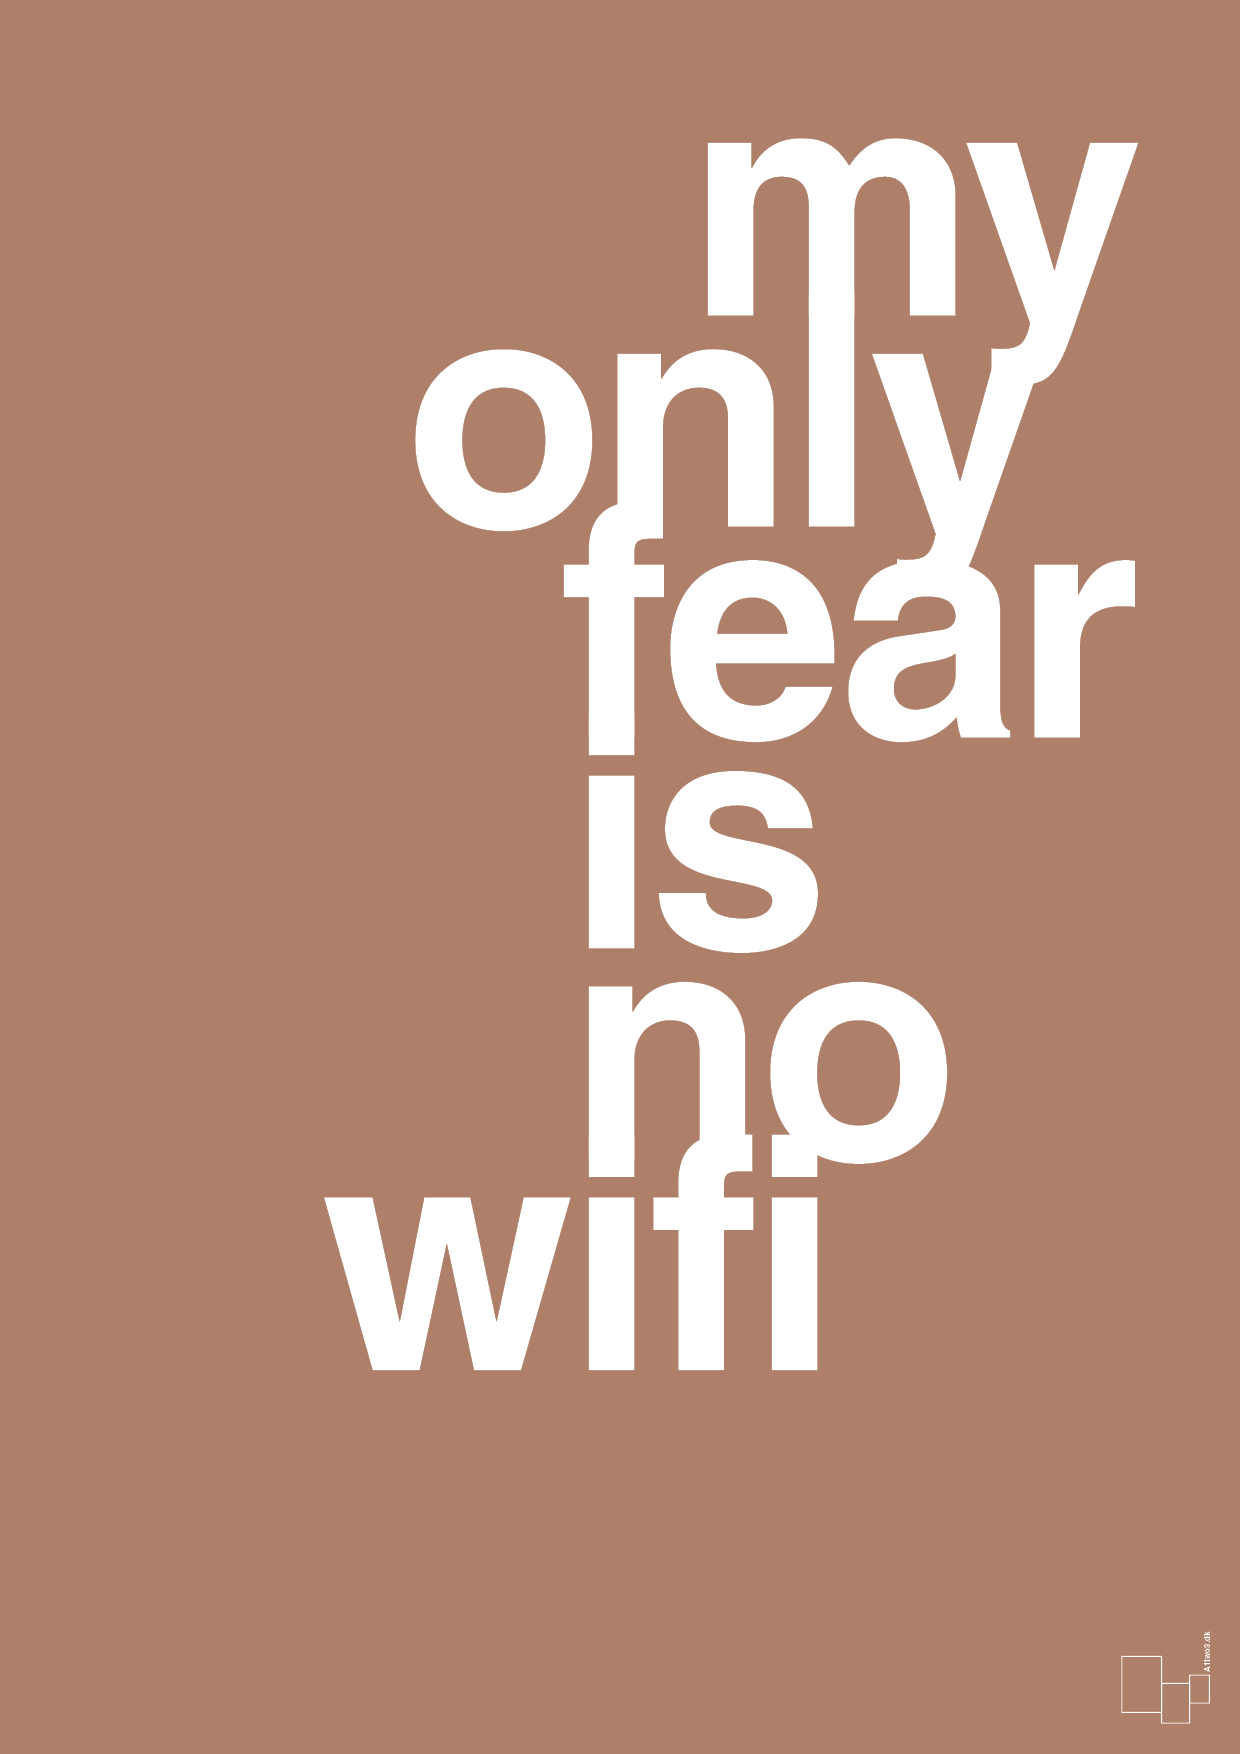 my only fear is no wifi - Plakat med Sport & Fritid i Cider Spice